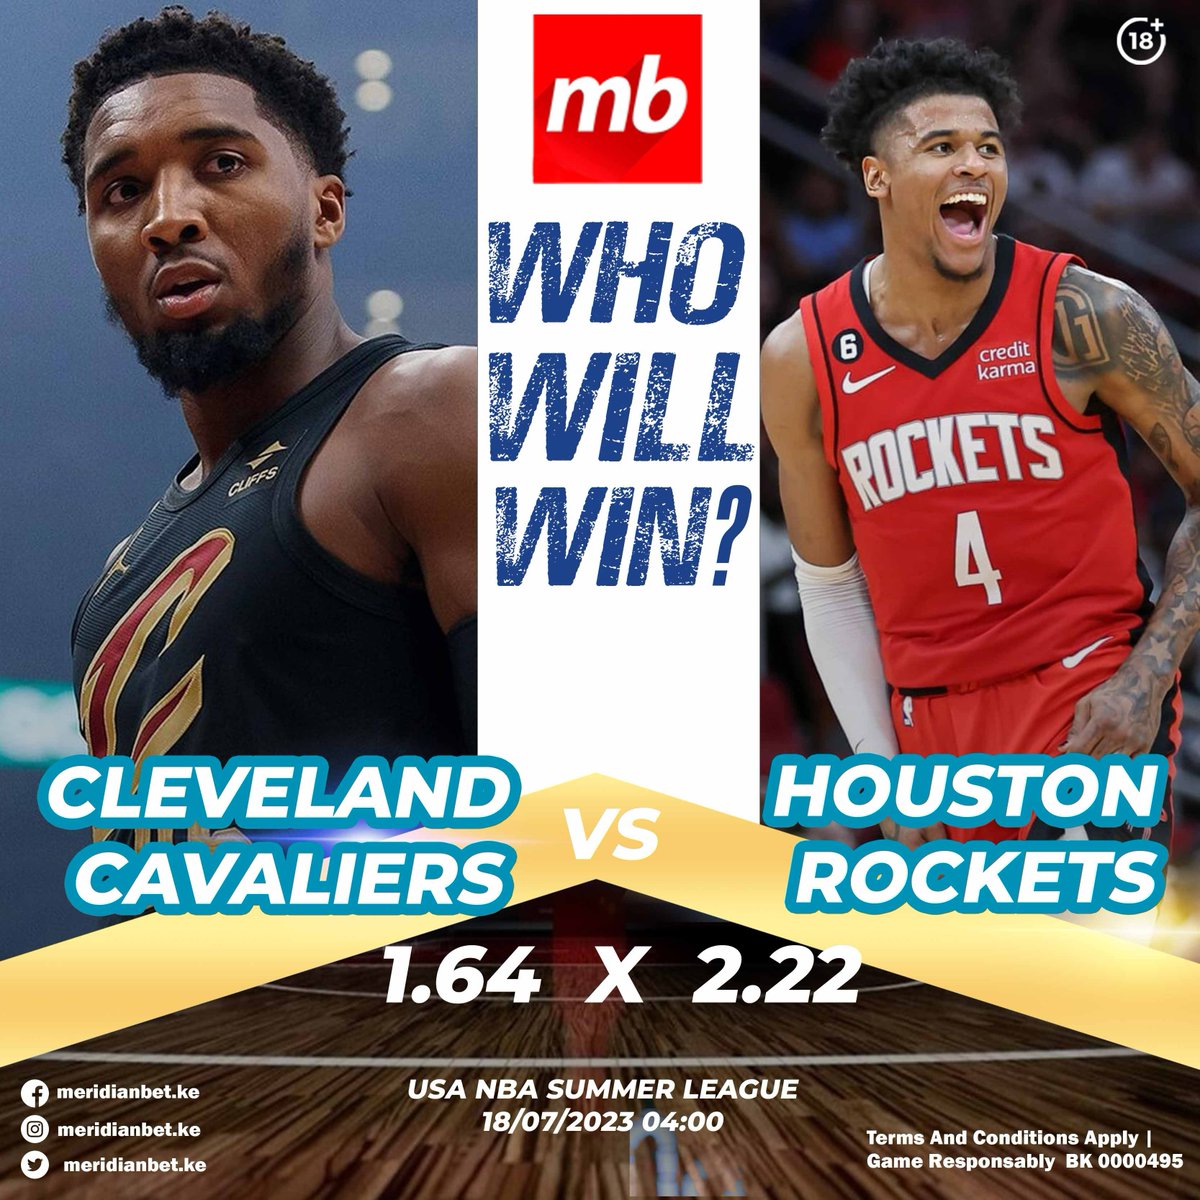 Who will win? Cleveland vs Houston Rockets.

Get the best odds with https://t.co/FpRXS3A8lb

https://t.co/DjaOtkLmcY https://t.co/XquaXQkuvA